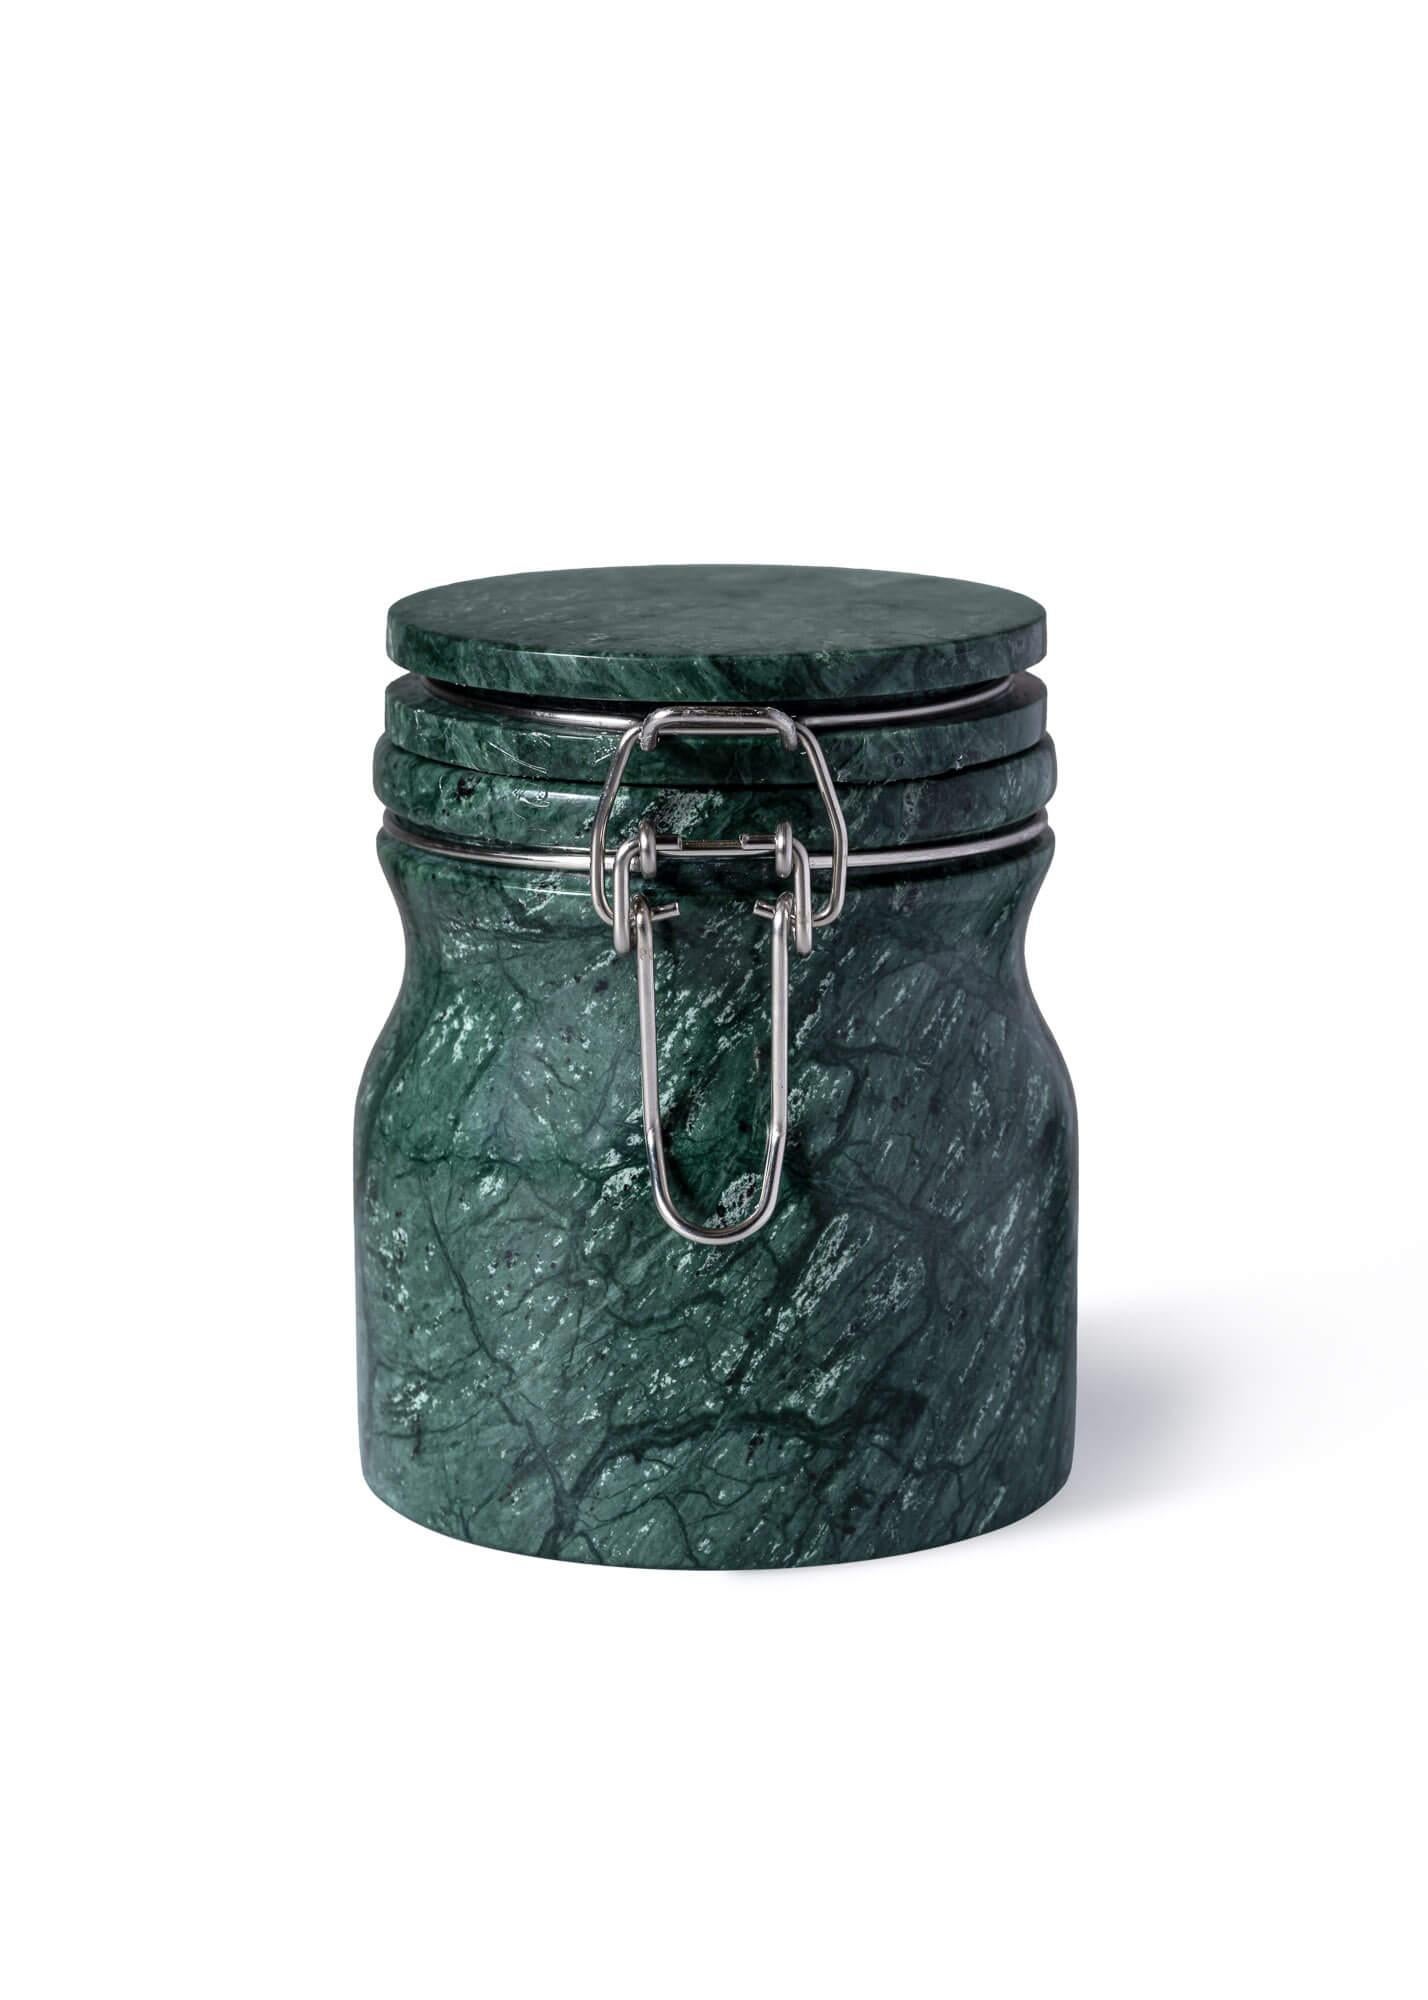 The Marblelous Jar is a handcrafted marble container inspired by traditional marmalade jars. Featuring a chromed latch for added contemporary flair, it is both beautiful to use and admire. Available in three colour variations - Green Guatemala,